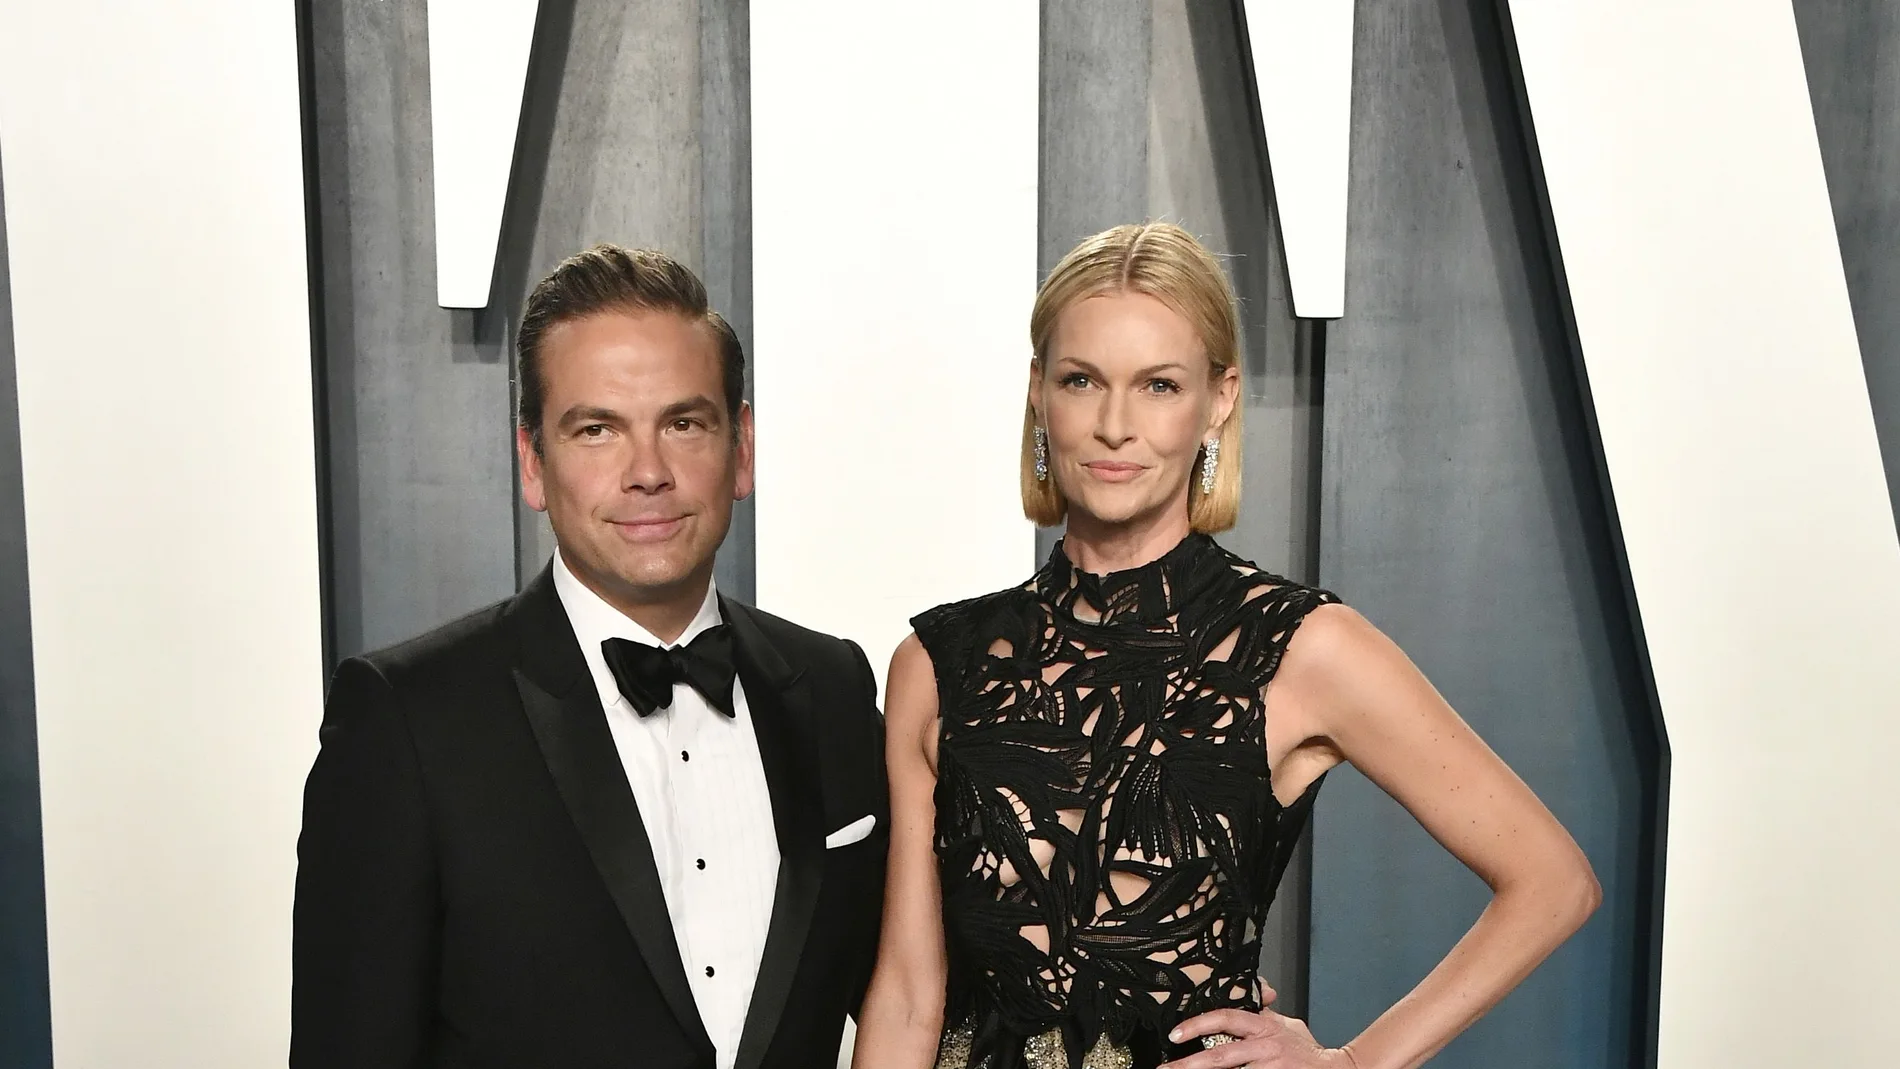 Lachlan Murdoch and Sarah Murdoch attend the 2020 Vanity Fair Oscar Party hosted by Radhika Jones at Wallis Annenberg Center for the Performing Arts